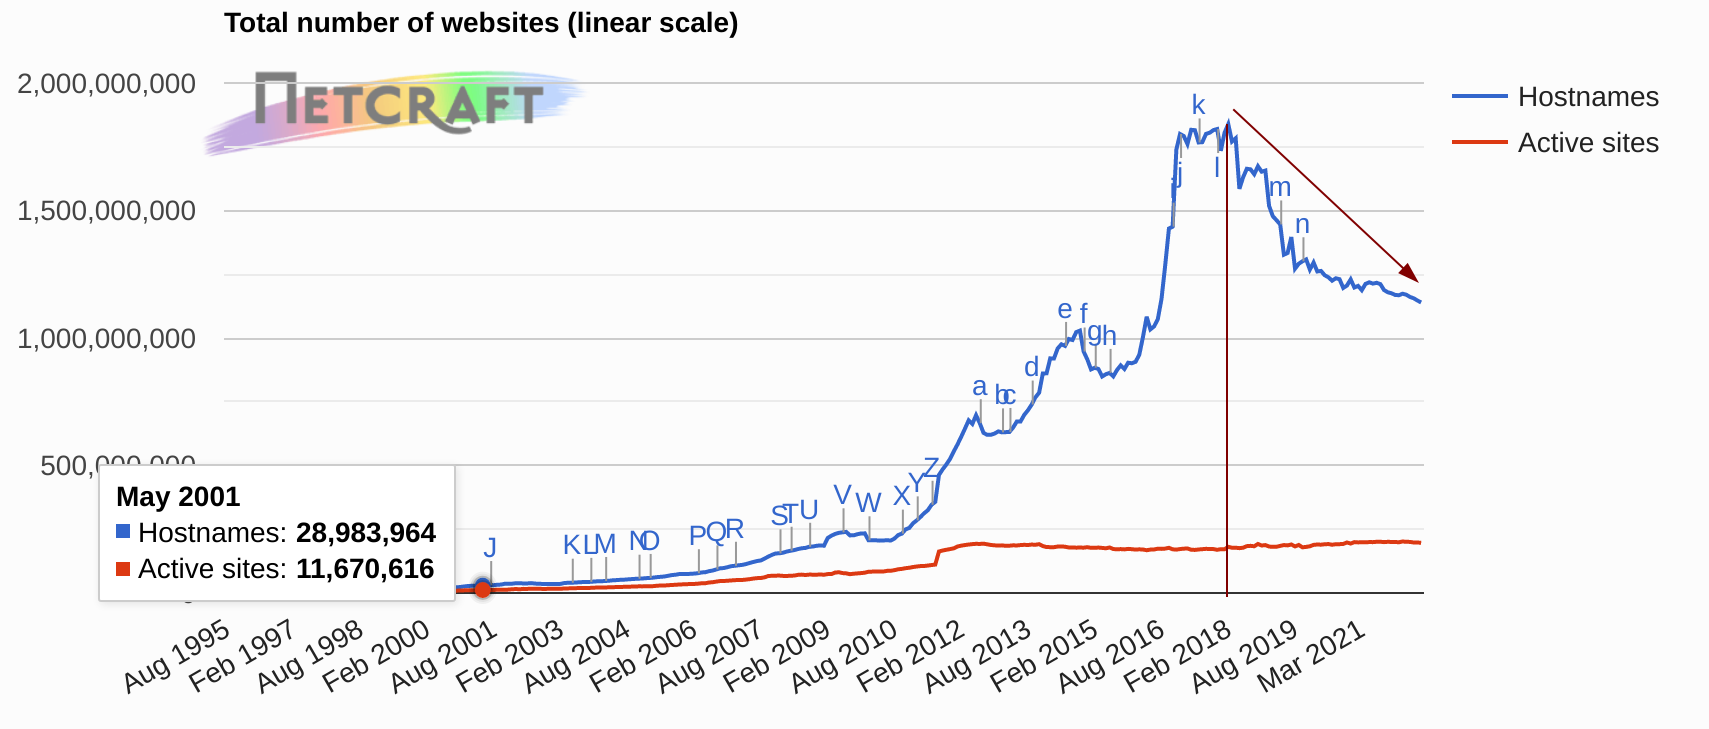 Web getting smaller: linear scale